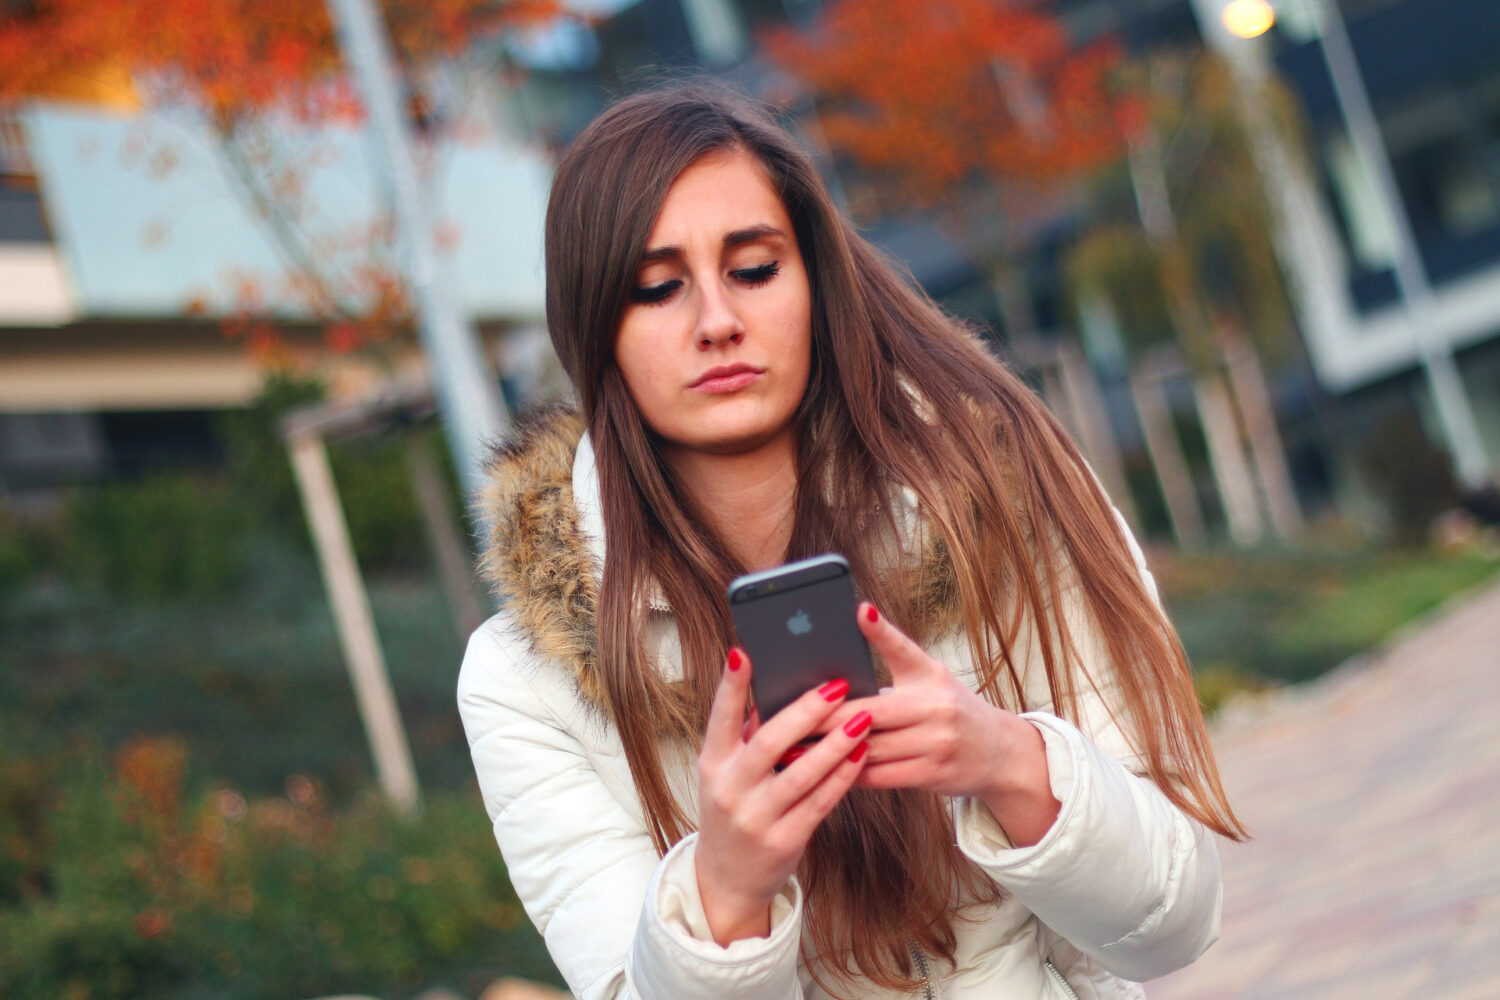 Is social media hurting your teen’s mental health?